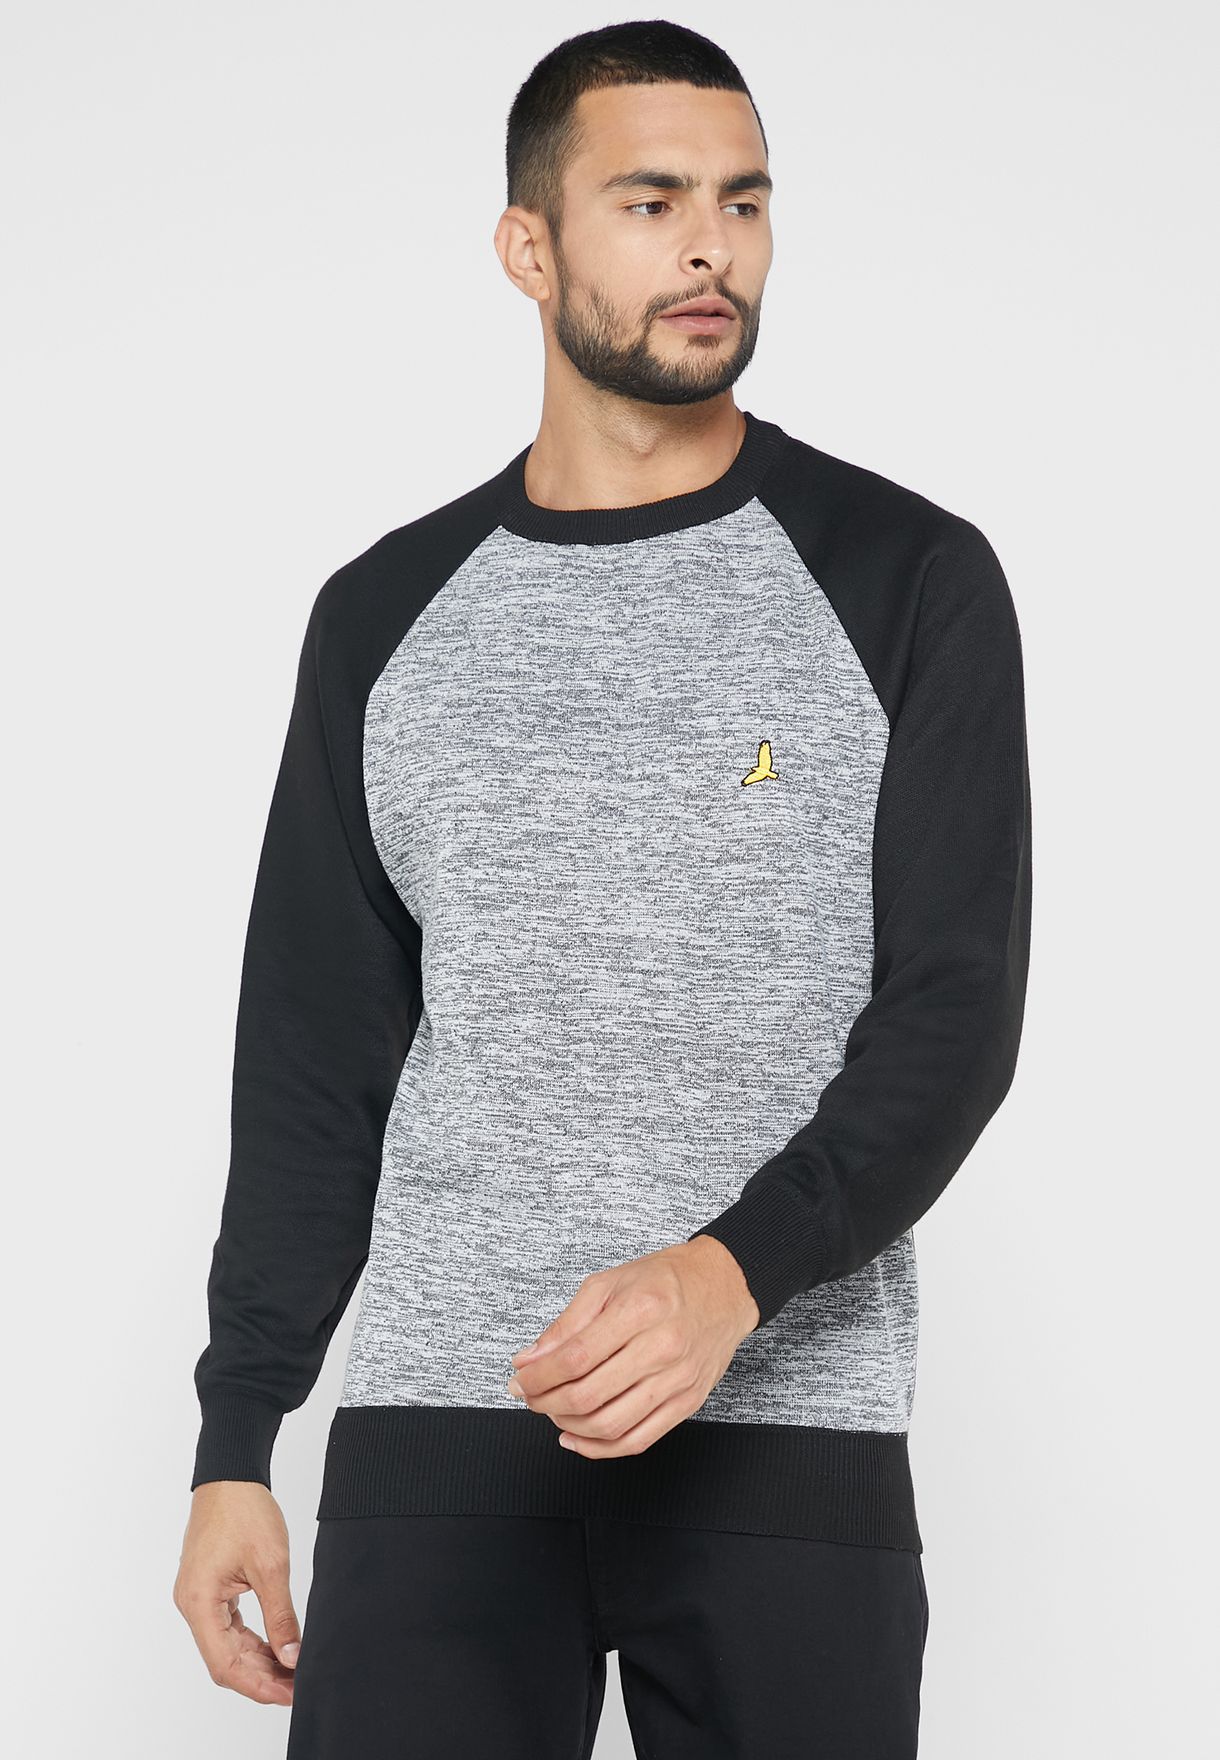 Bravesoul Crew Neck Long Sleeve Kitted Sweater